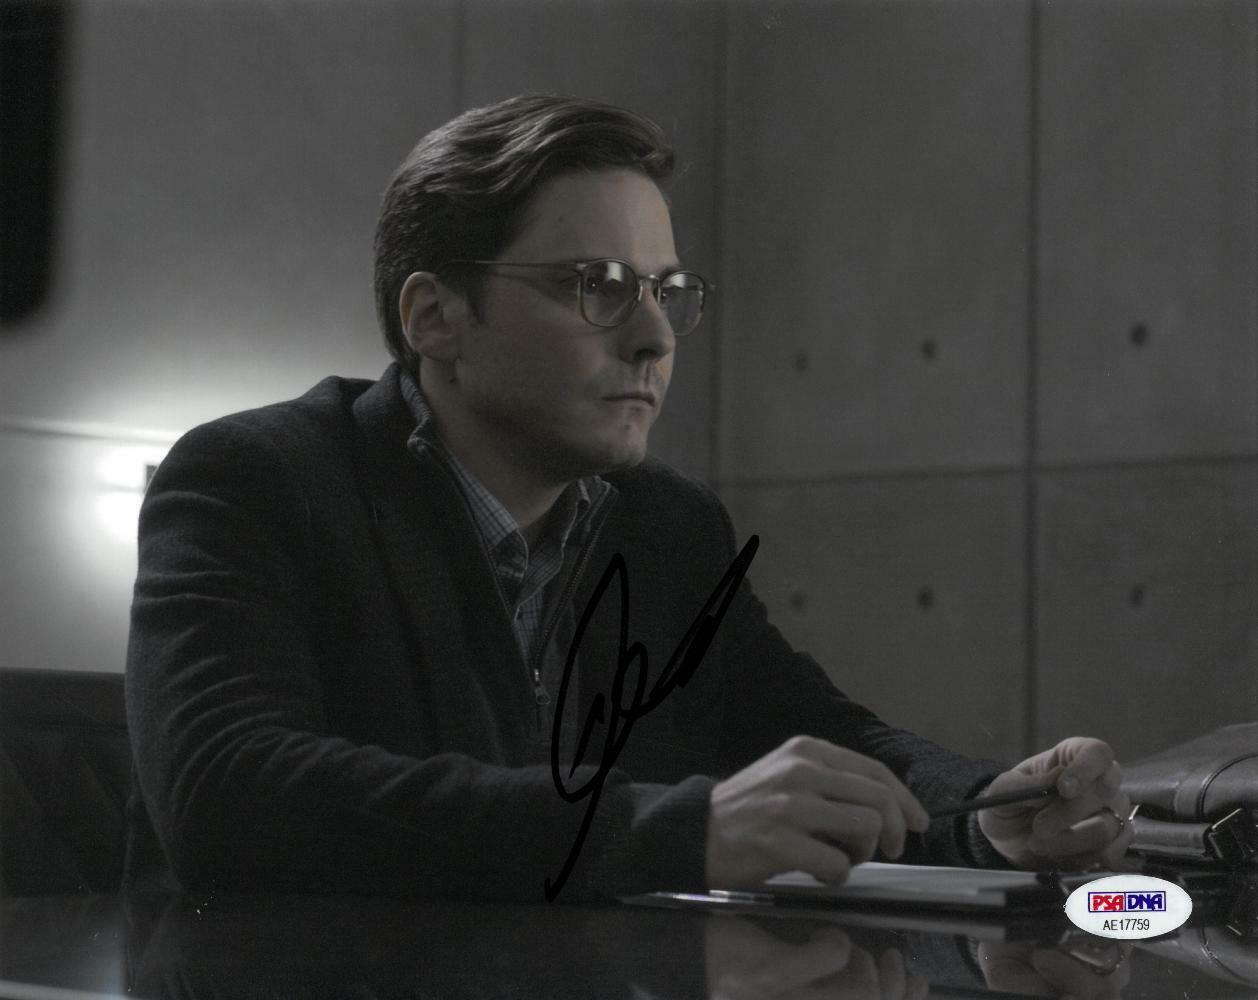 Daniel Bruhl Signed Captain America Autographed 8x10 Photo Poster painting PSA/DNA #AE17759